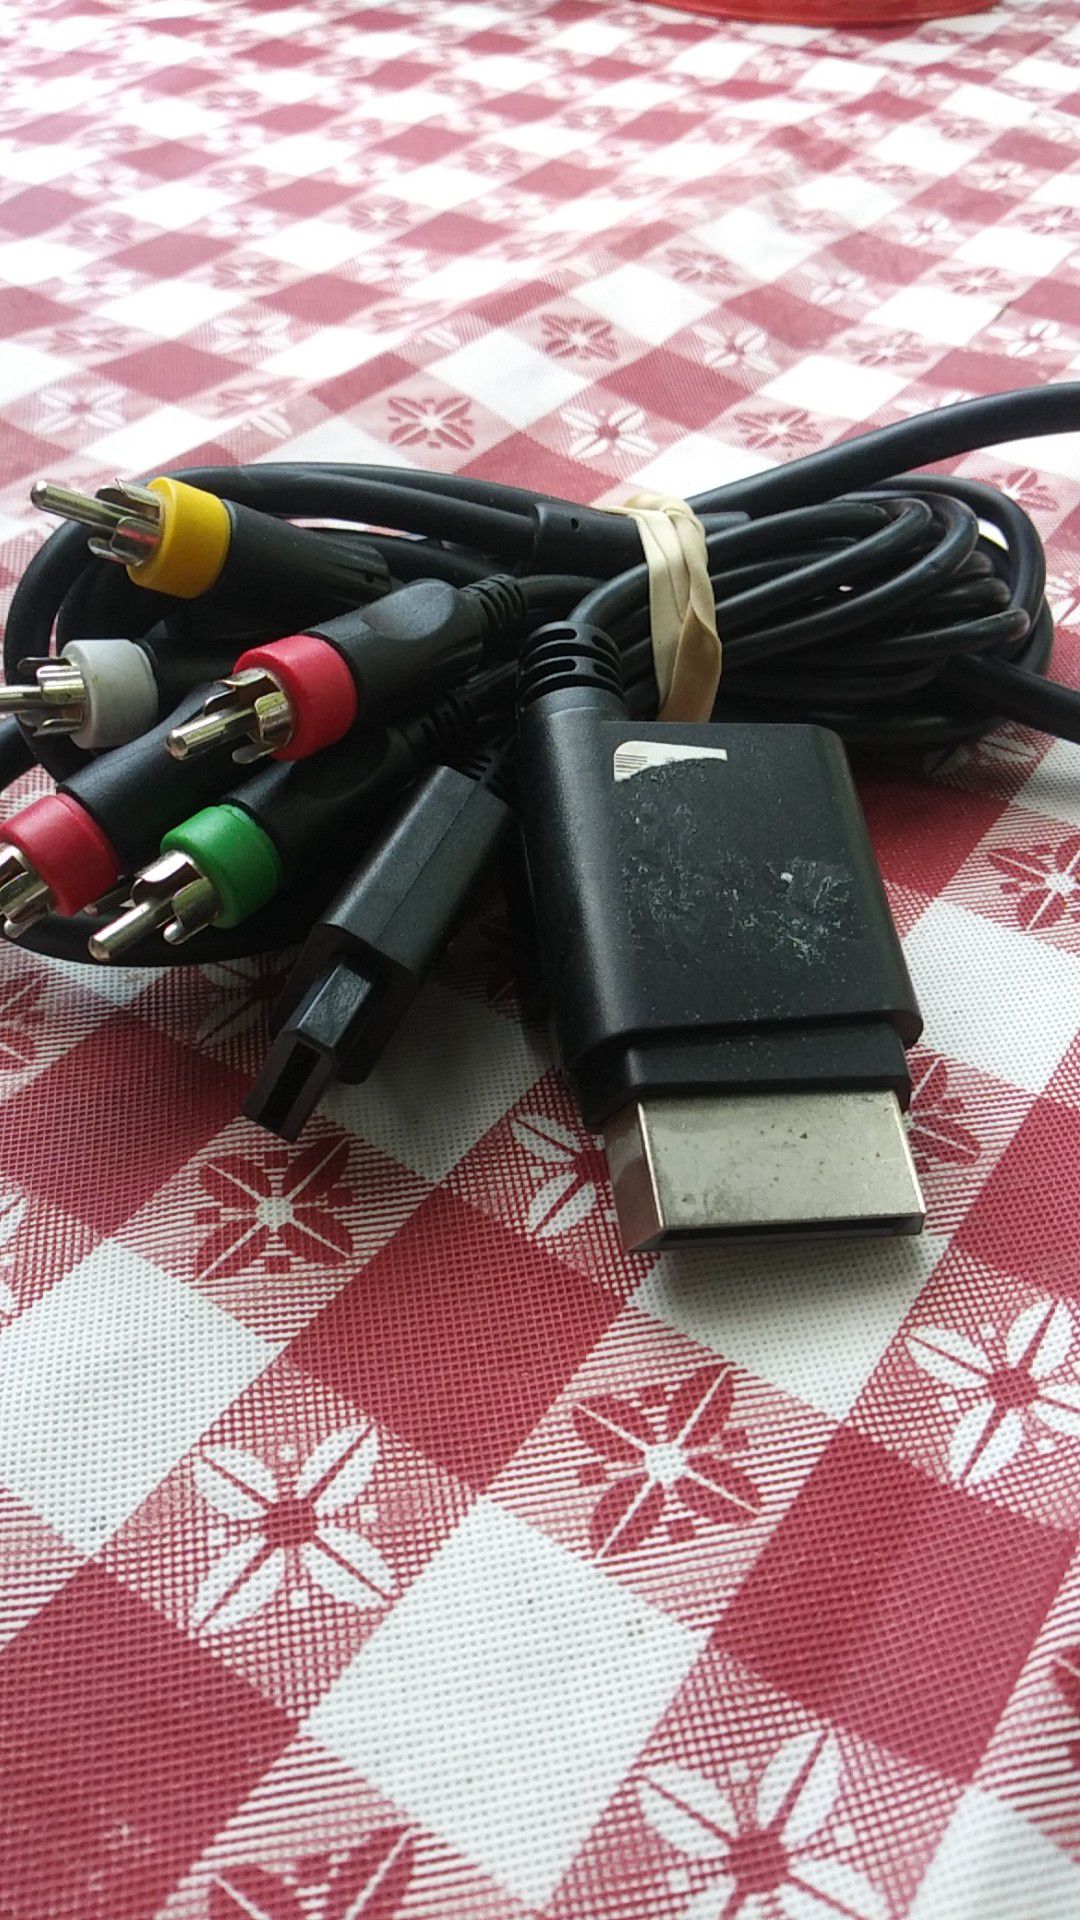 Hdtv/tv to ps3/ps2 power cord